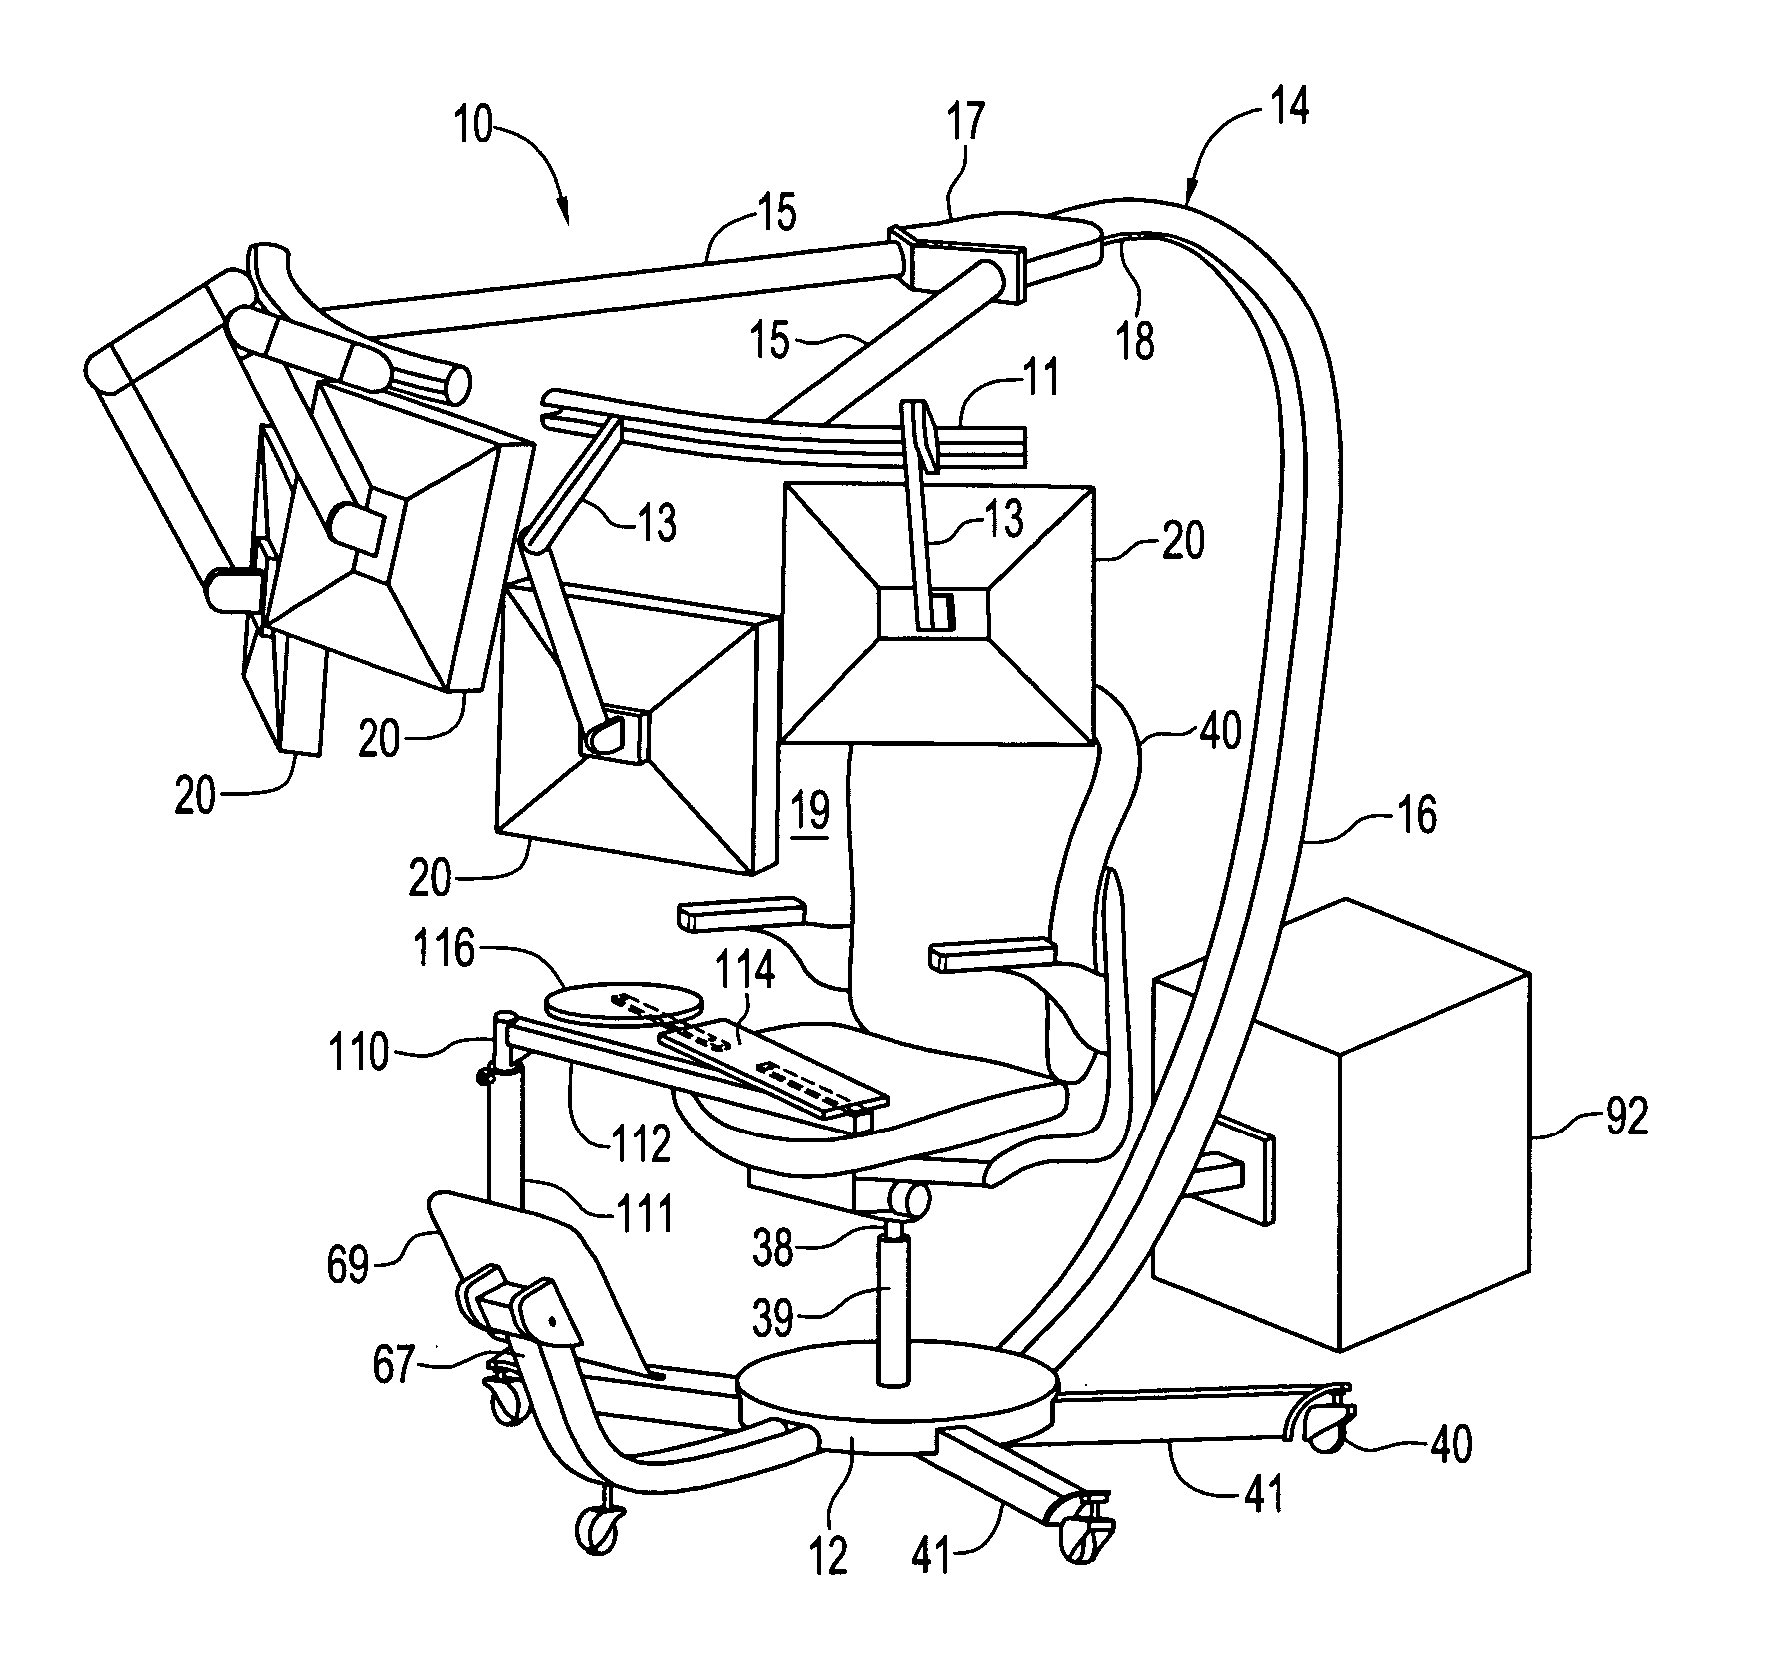 Peripheral support apparatus and method